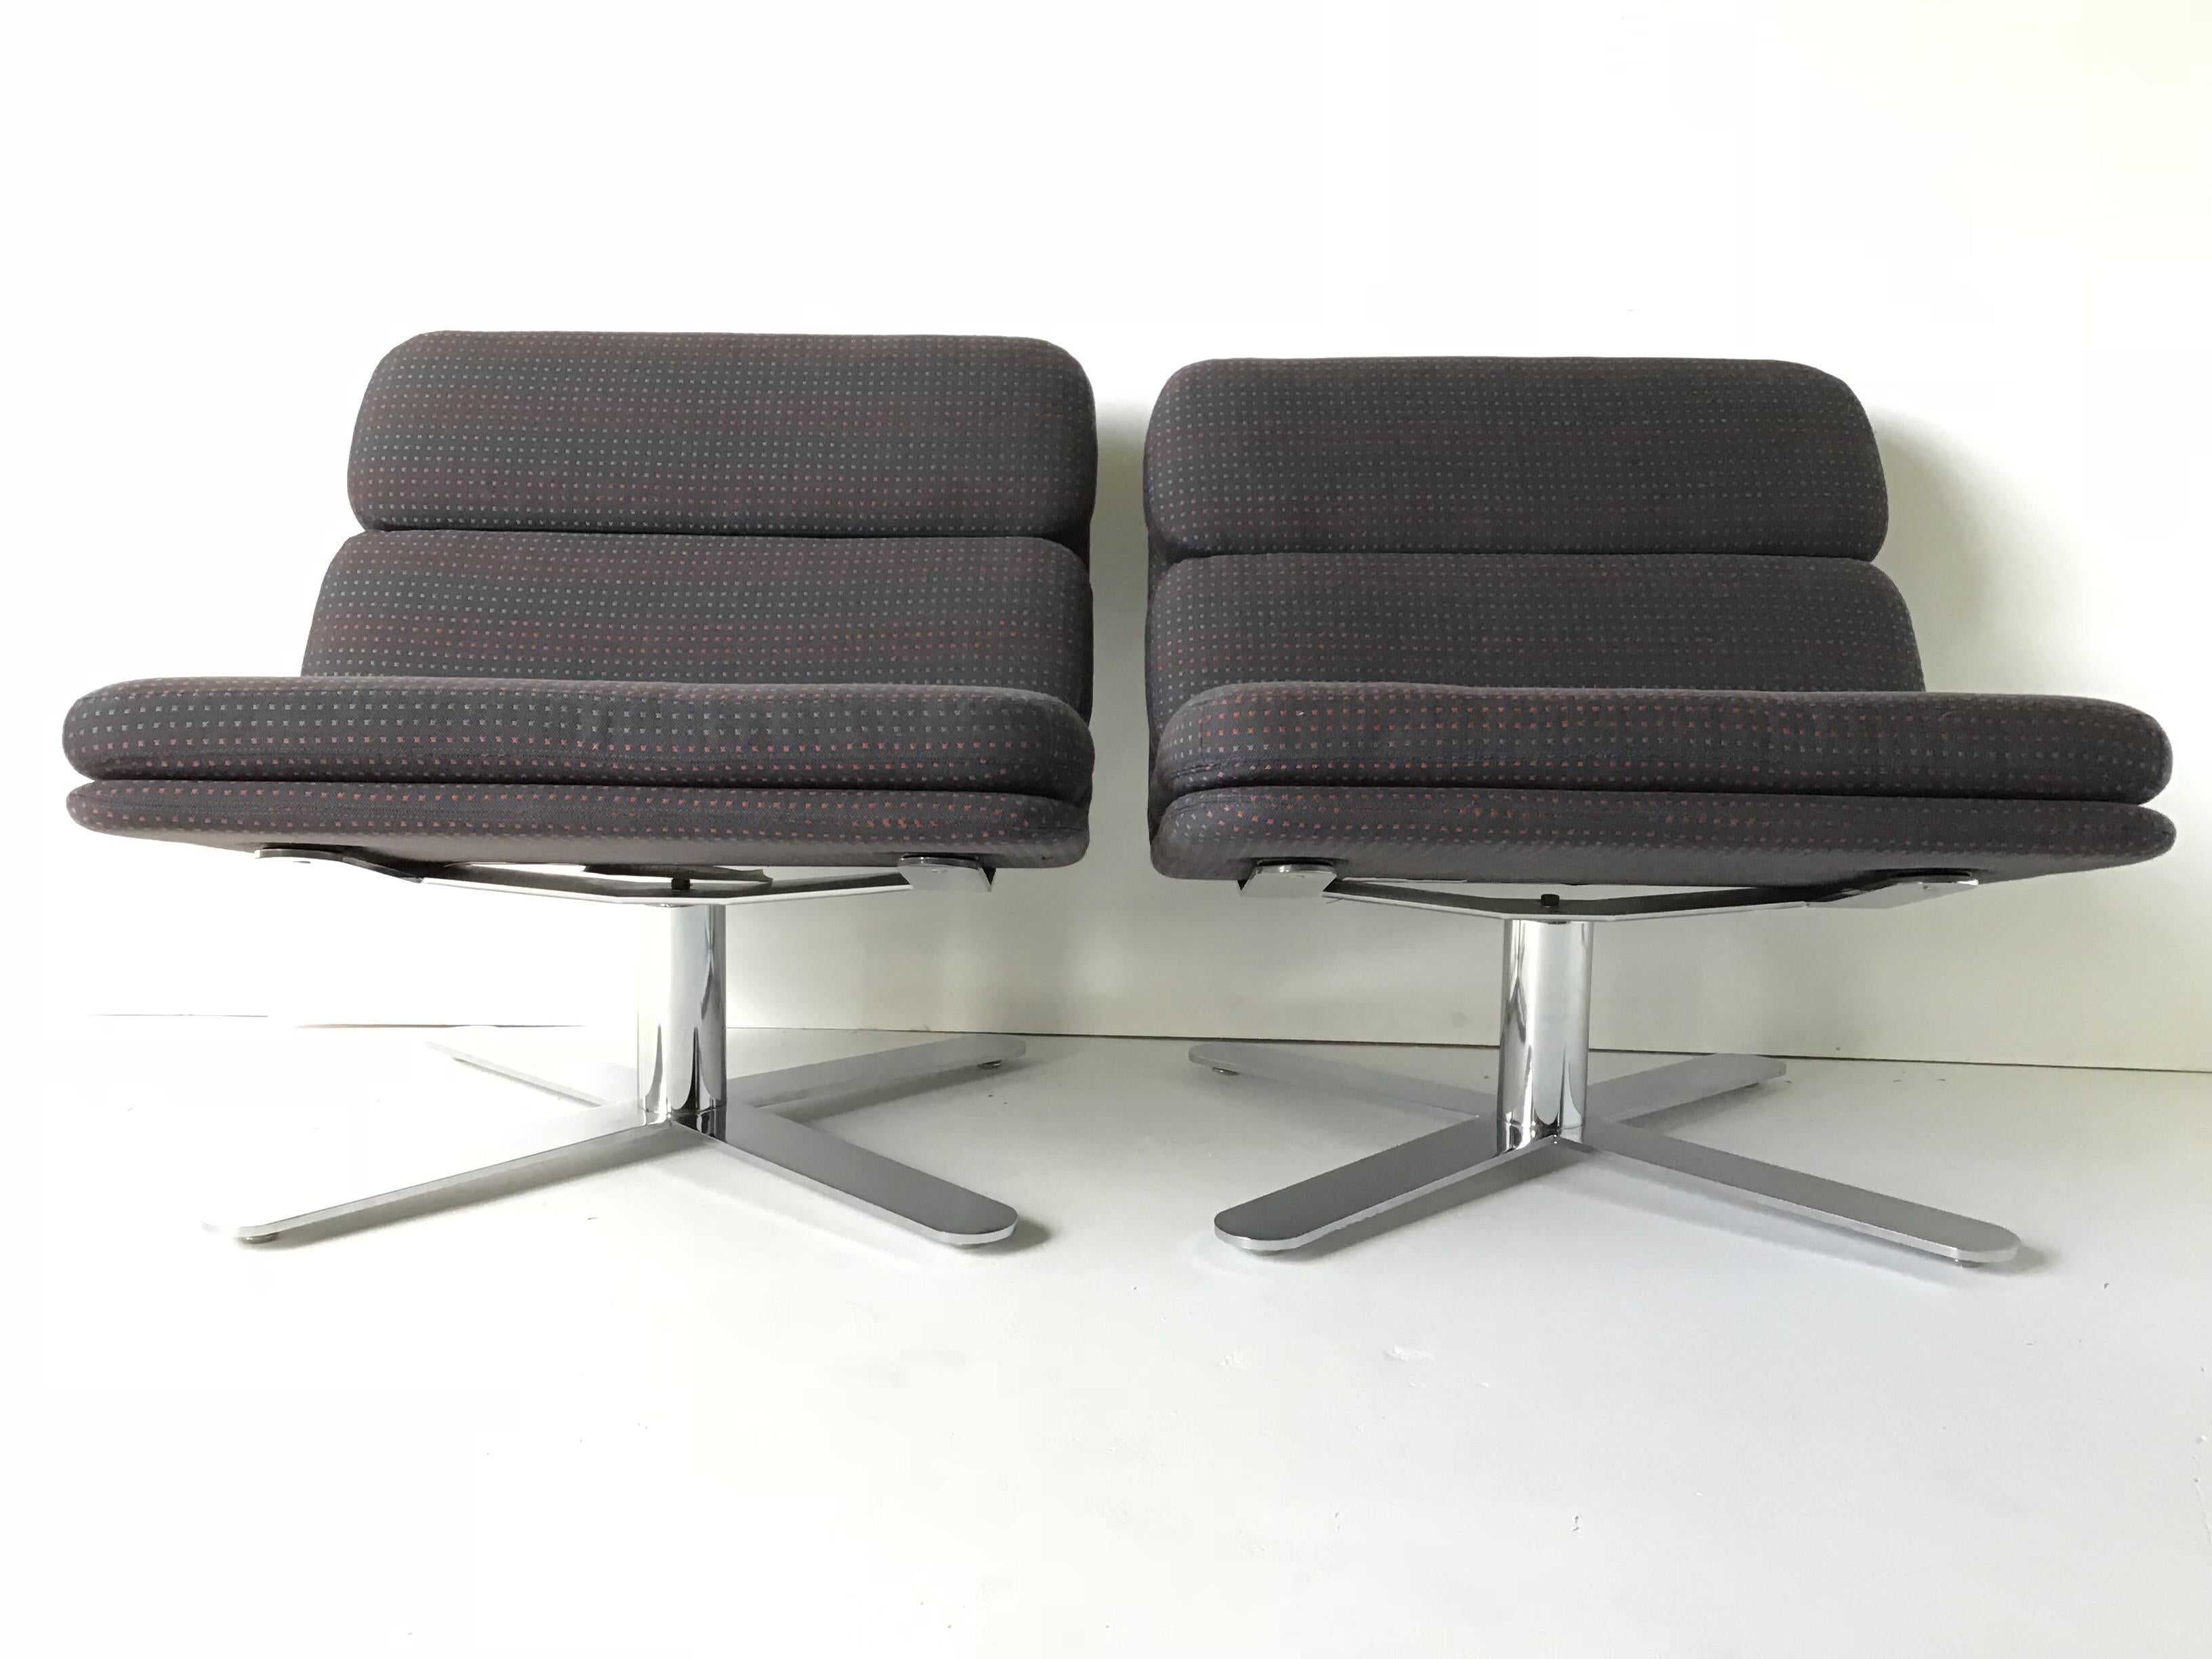 This pair of chairs is super sleek! I love the heavy duty flat bar heavy chrome bases and brackets that curve up the backs! These are “Solo” lounge chairs designed by John Follis in the 1980s for Fortress. They are in their original 1985 techno